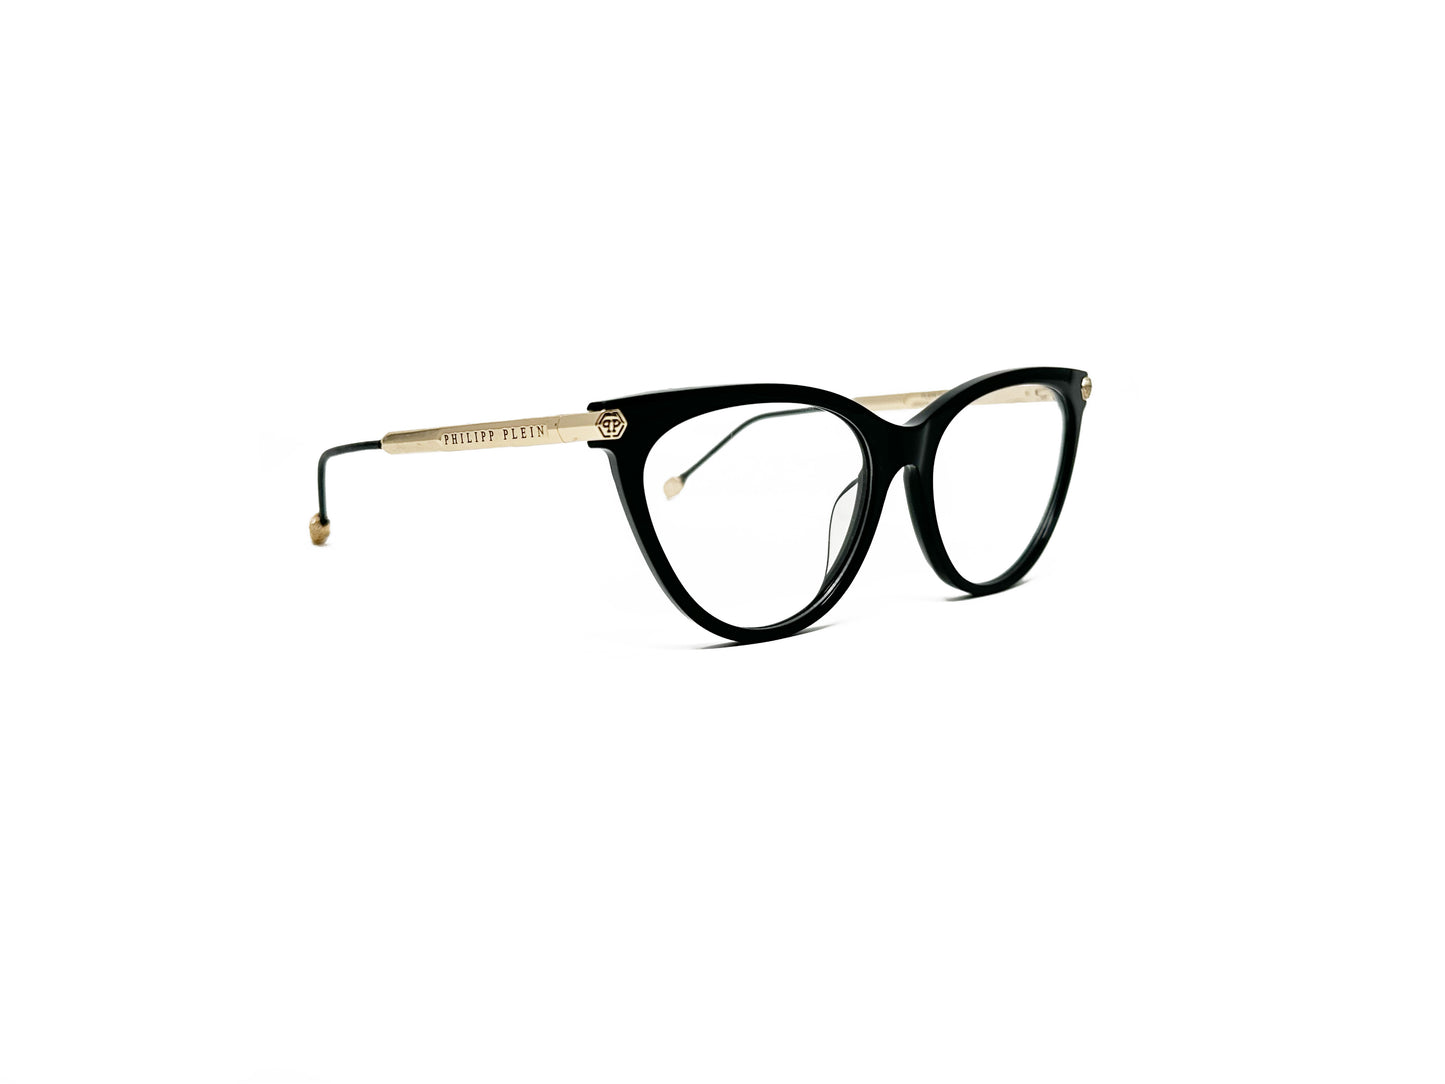 Philipp Plein cat-eye optical frame. Model: VPP037S Flawless. Color: 0700 Black with gold accents. Side view.